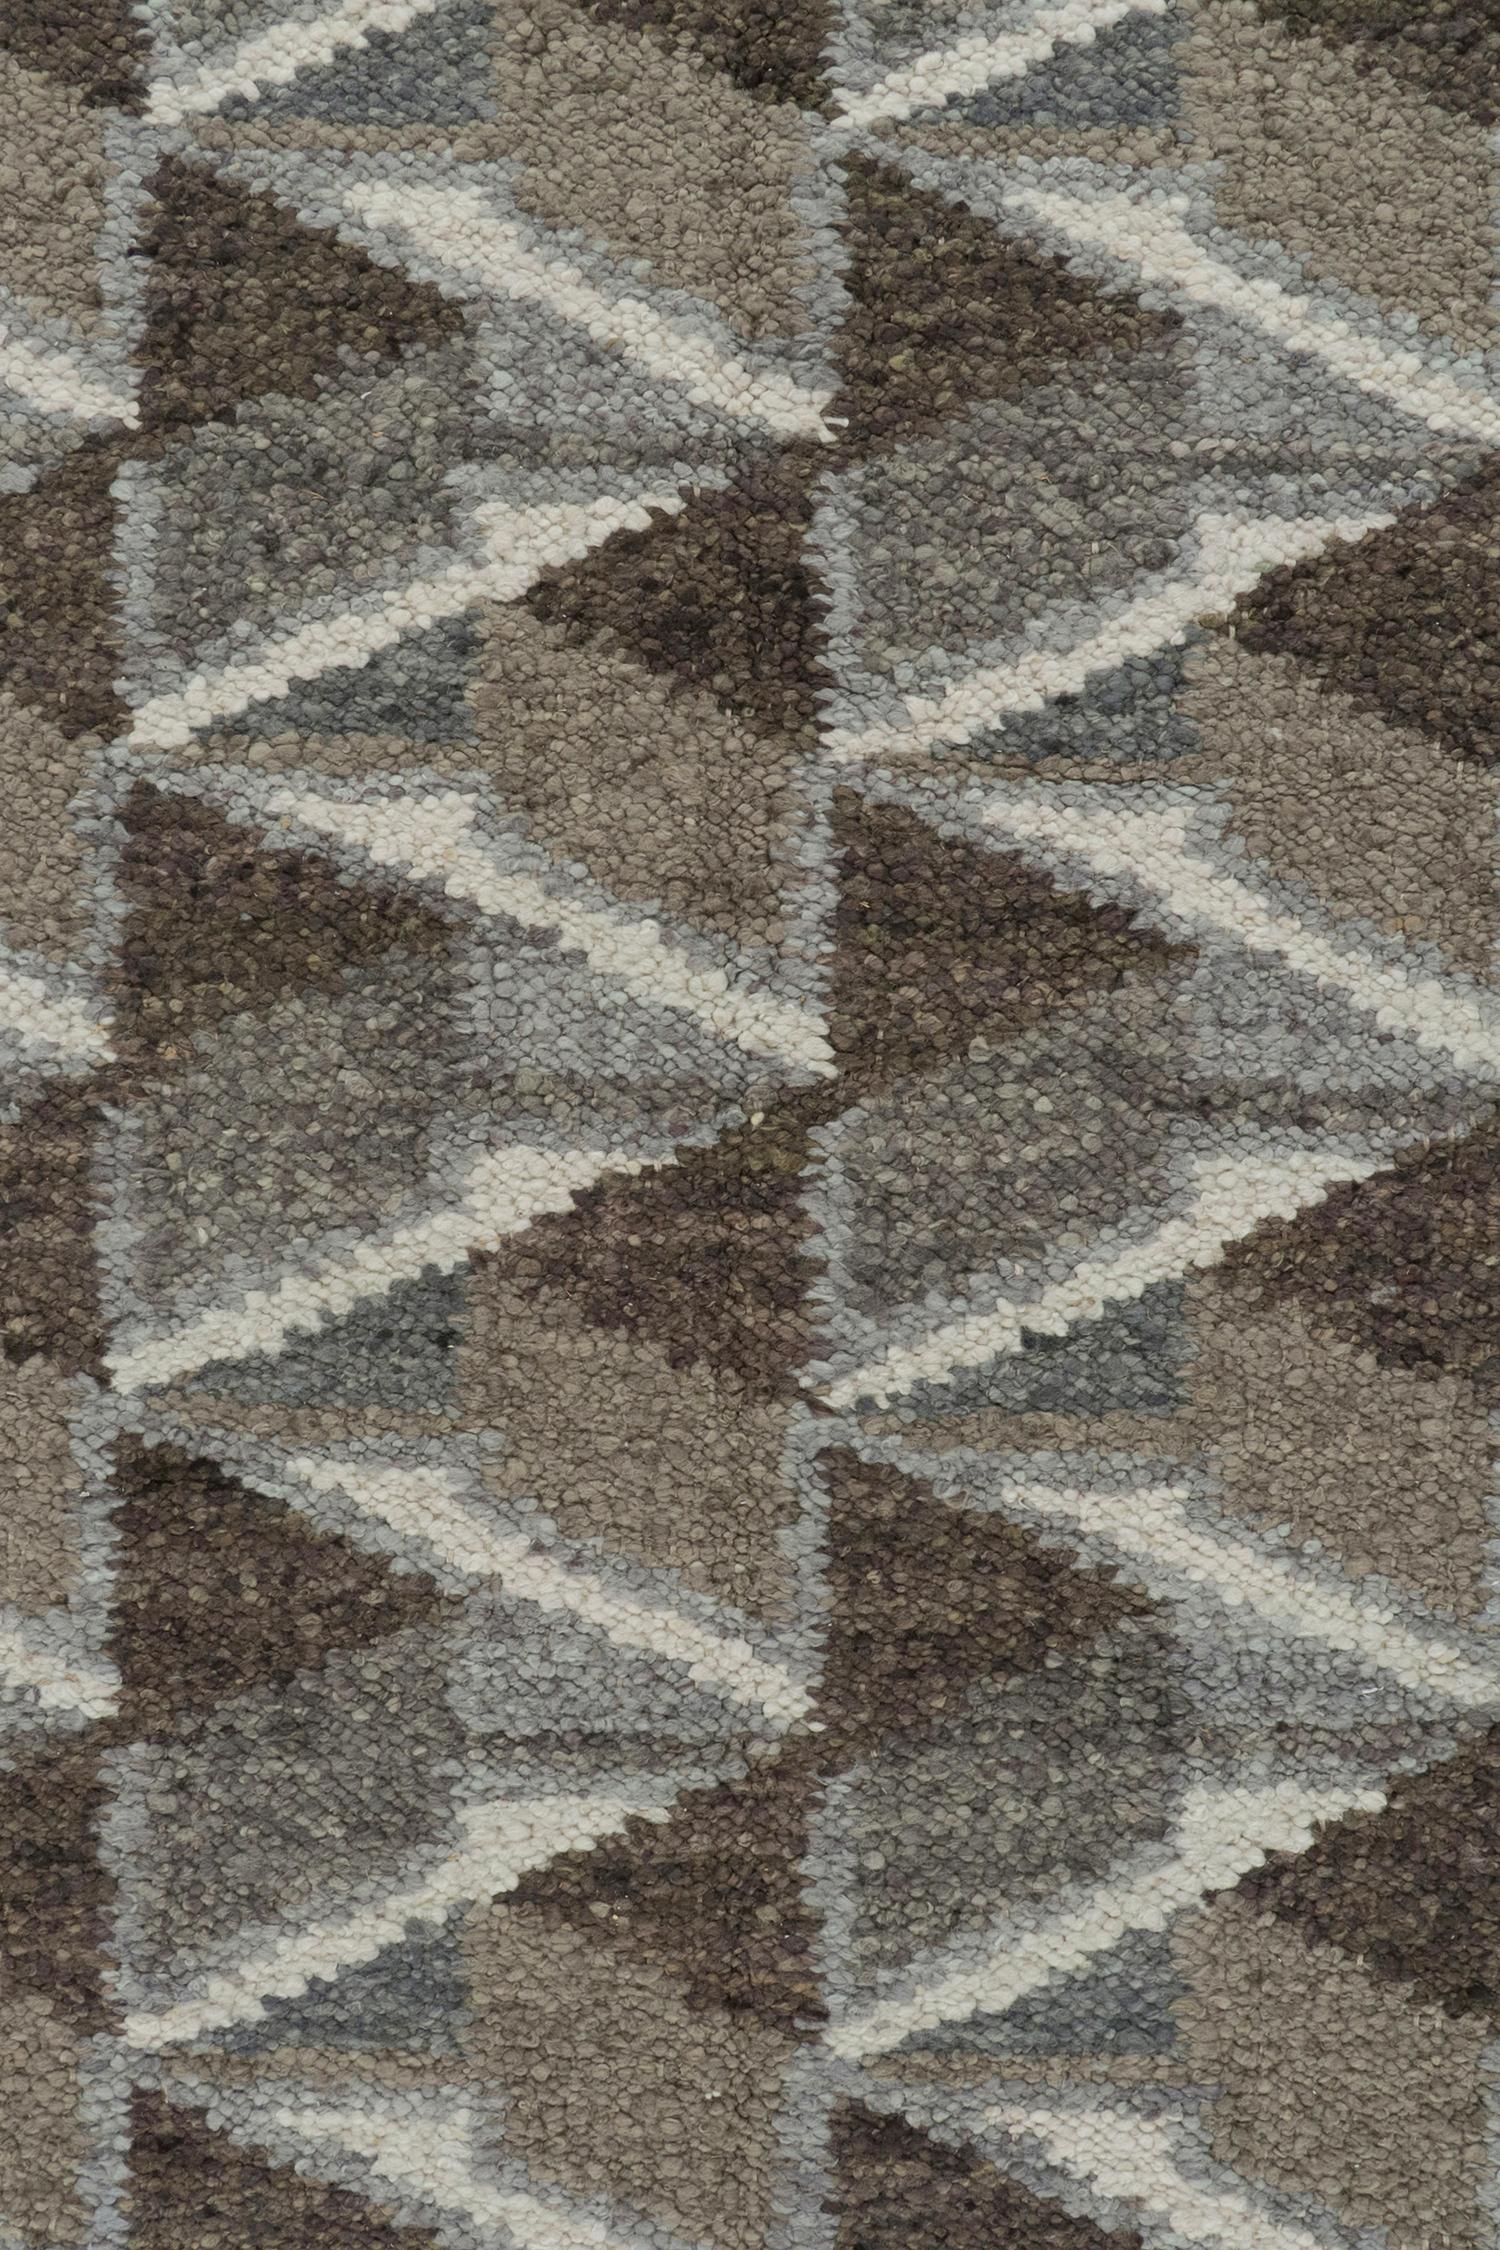 Rug & Kilim’s Scandinavian Style Kilim in Brown, White & Grey Geometric Patterns In New Condition For Sale In Long Island City, NY